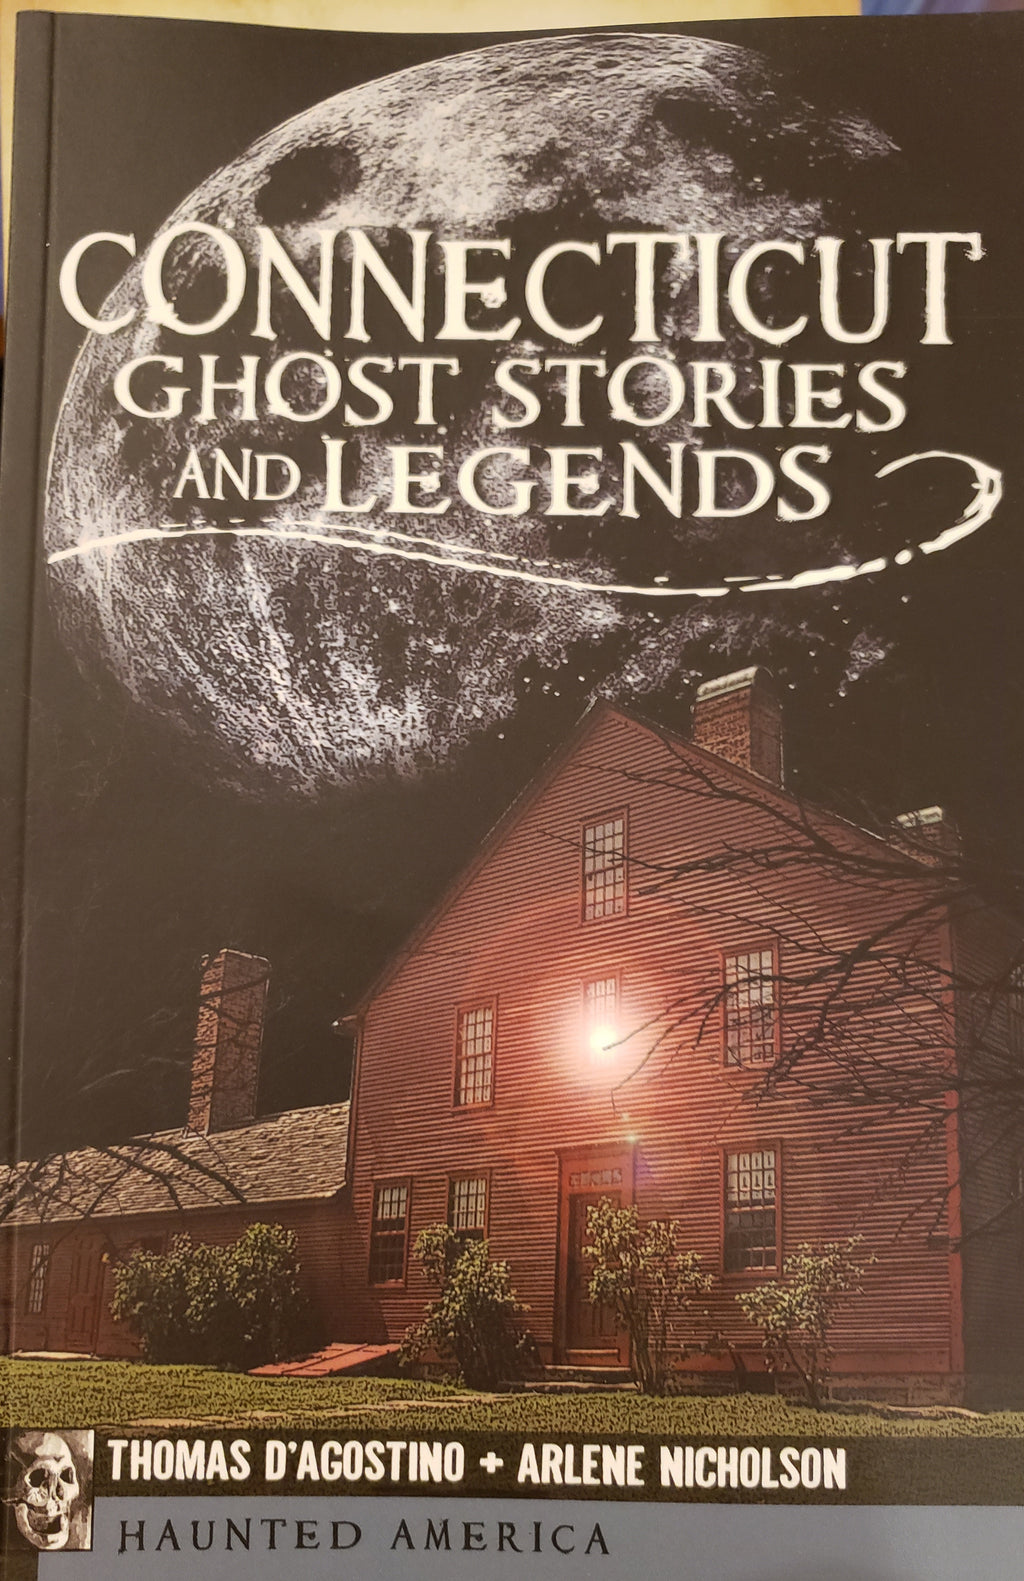 Connecticut Ghost Stories and Legends by Thomas D'Agostino and Arlene Nicholson